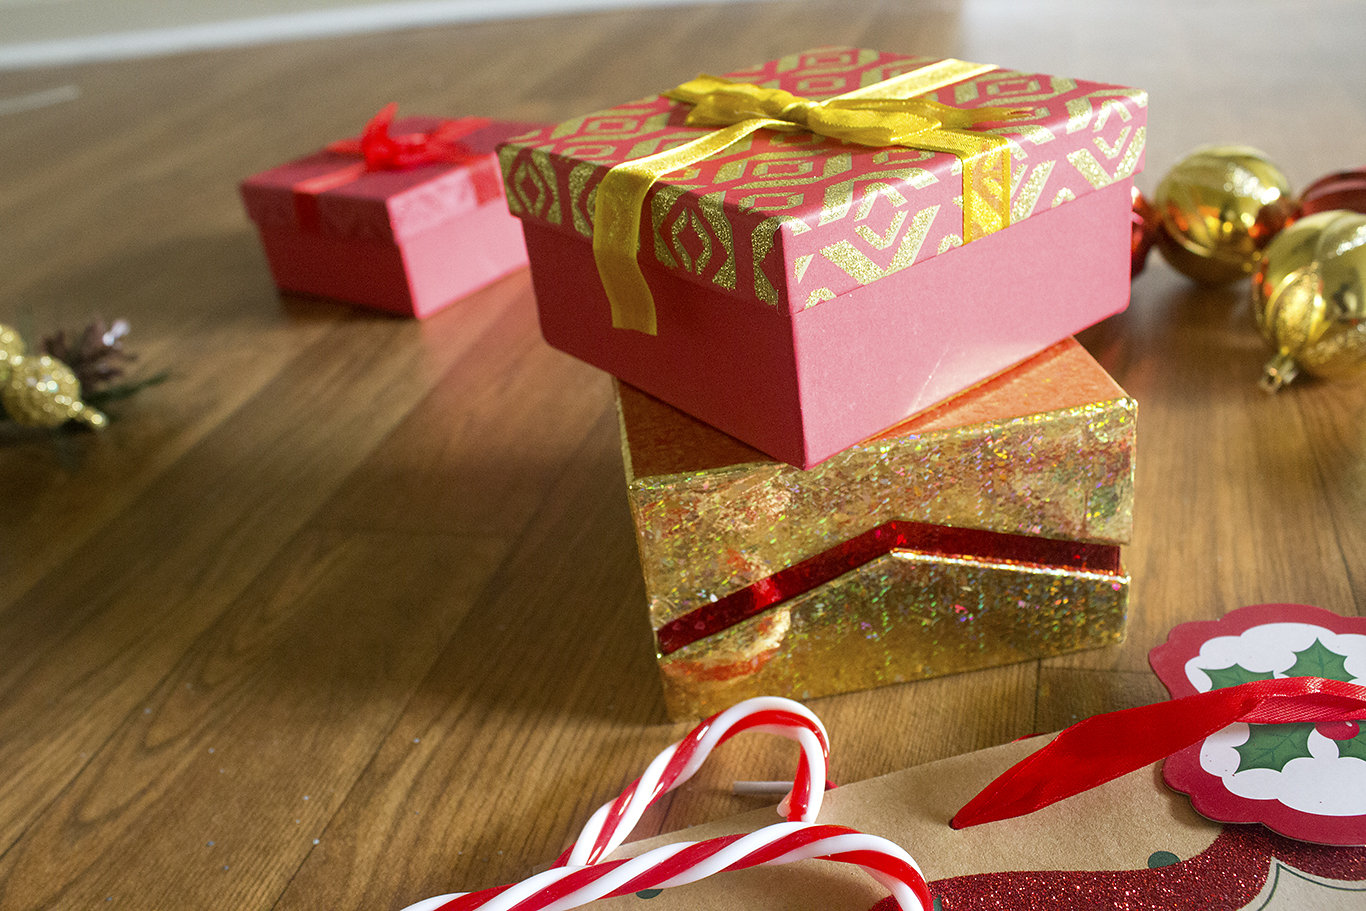 Why You Should Buy Your Own Gift This Christmas